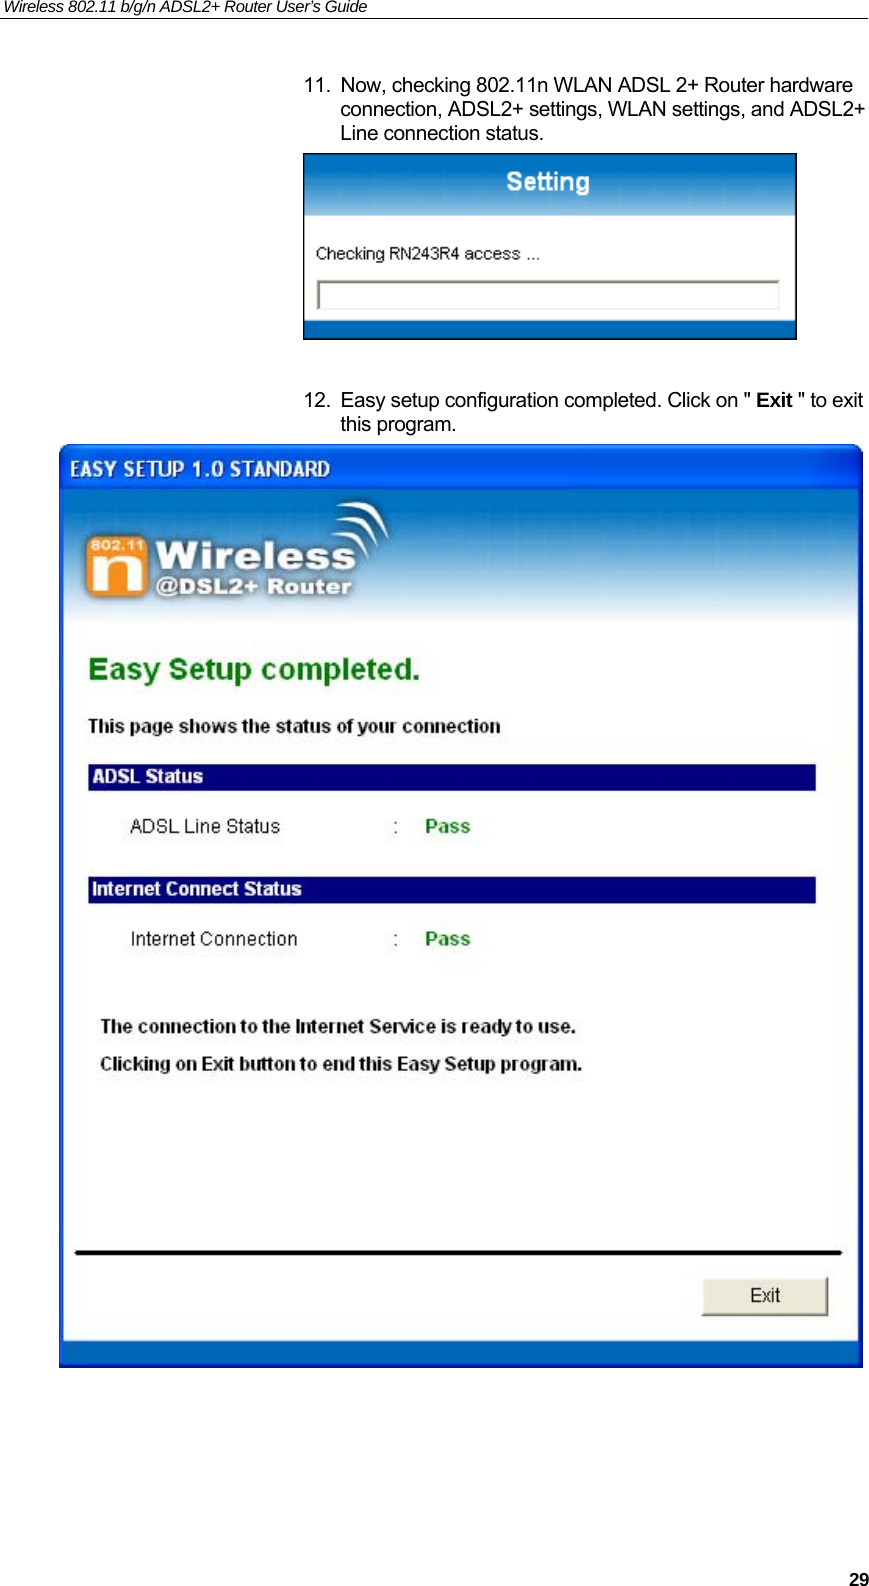 Wireless 802.11 b/g/n ADSL2+ Router User’s Guide    11.  Now, checking 802.11n WLAN ADSL 2+ Router hardware connection, ADSL2+ settings, WLAN settings, and ADSL2+ Line connection status.   12.  Easy setup configuration completed. Click on &quot; Exit &quot; to exit this program.       29